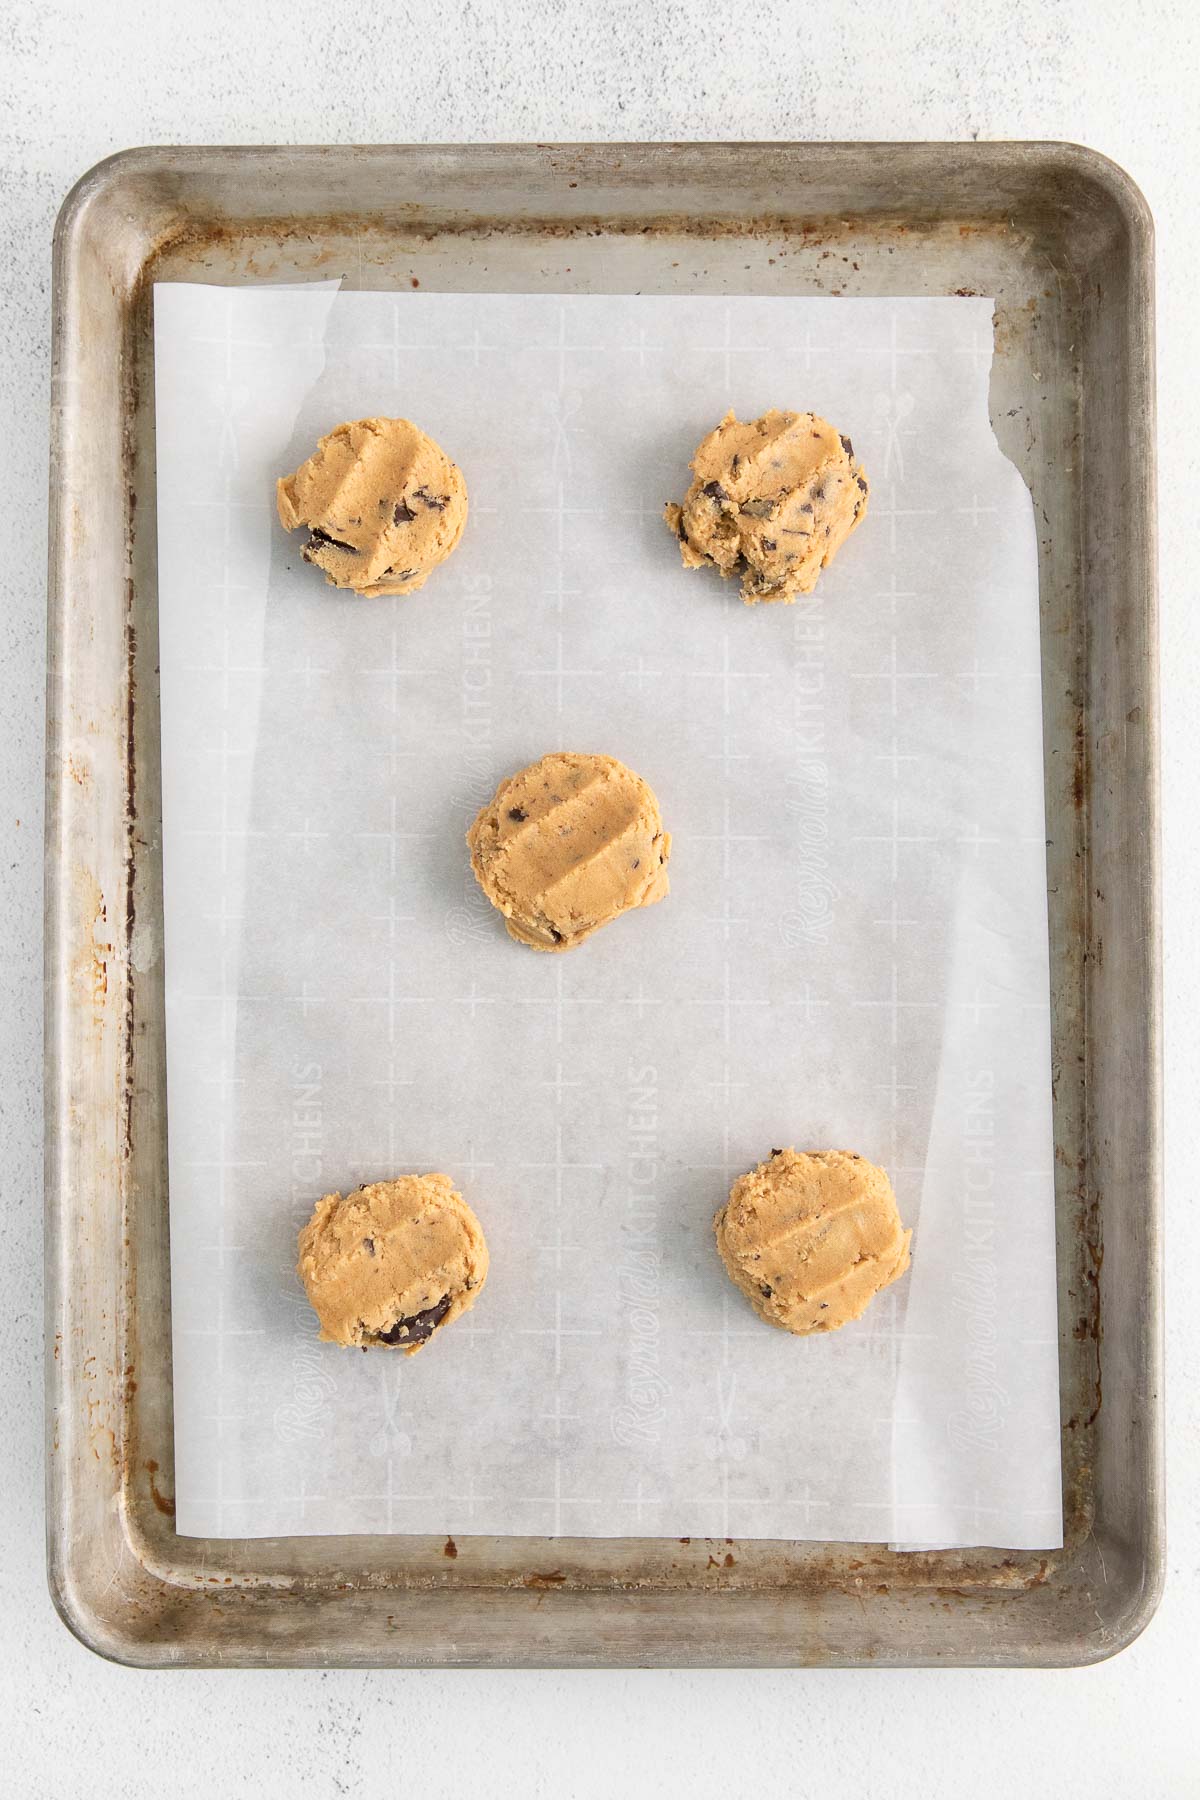 five raw peanut butter cookies with chocolate chunks added on a parchment lined baking sheet.